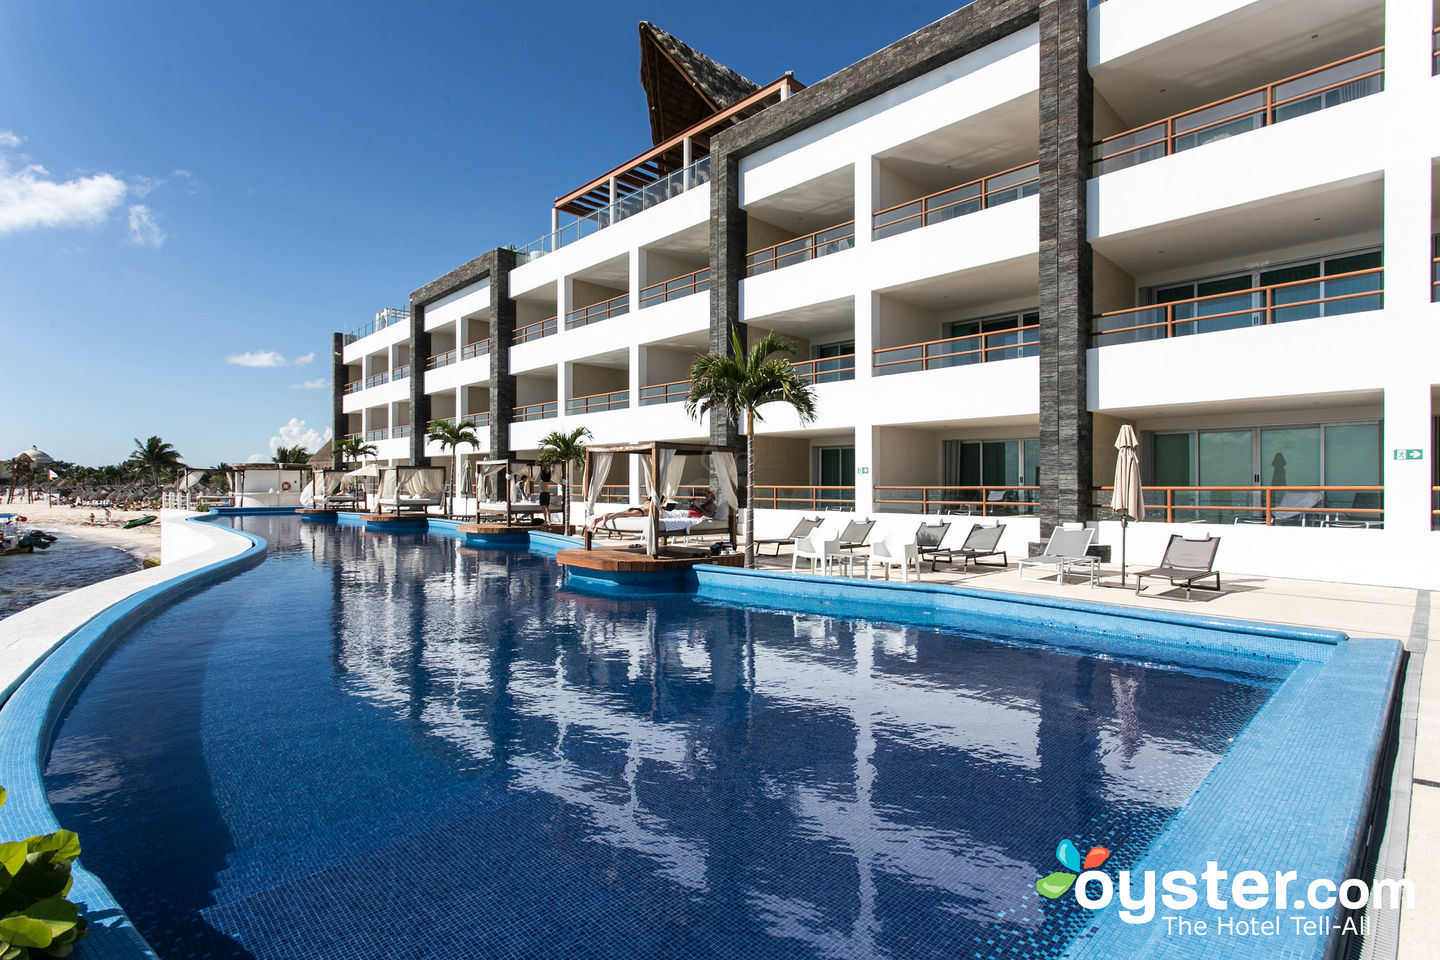 Senses Riviera Maya by Artisan Review: What To REALLY Expect If You Stay